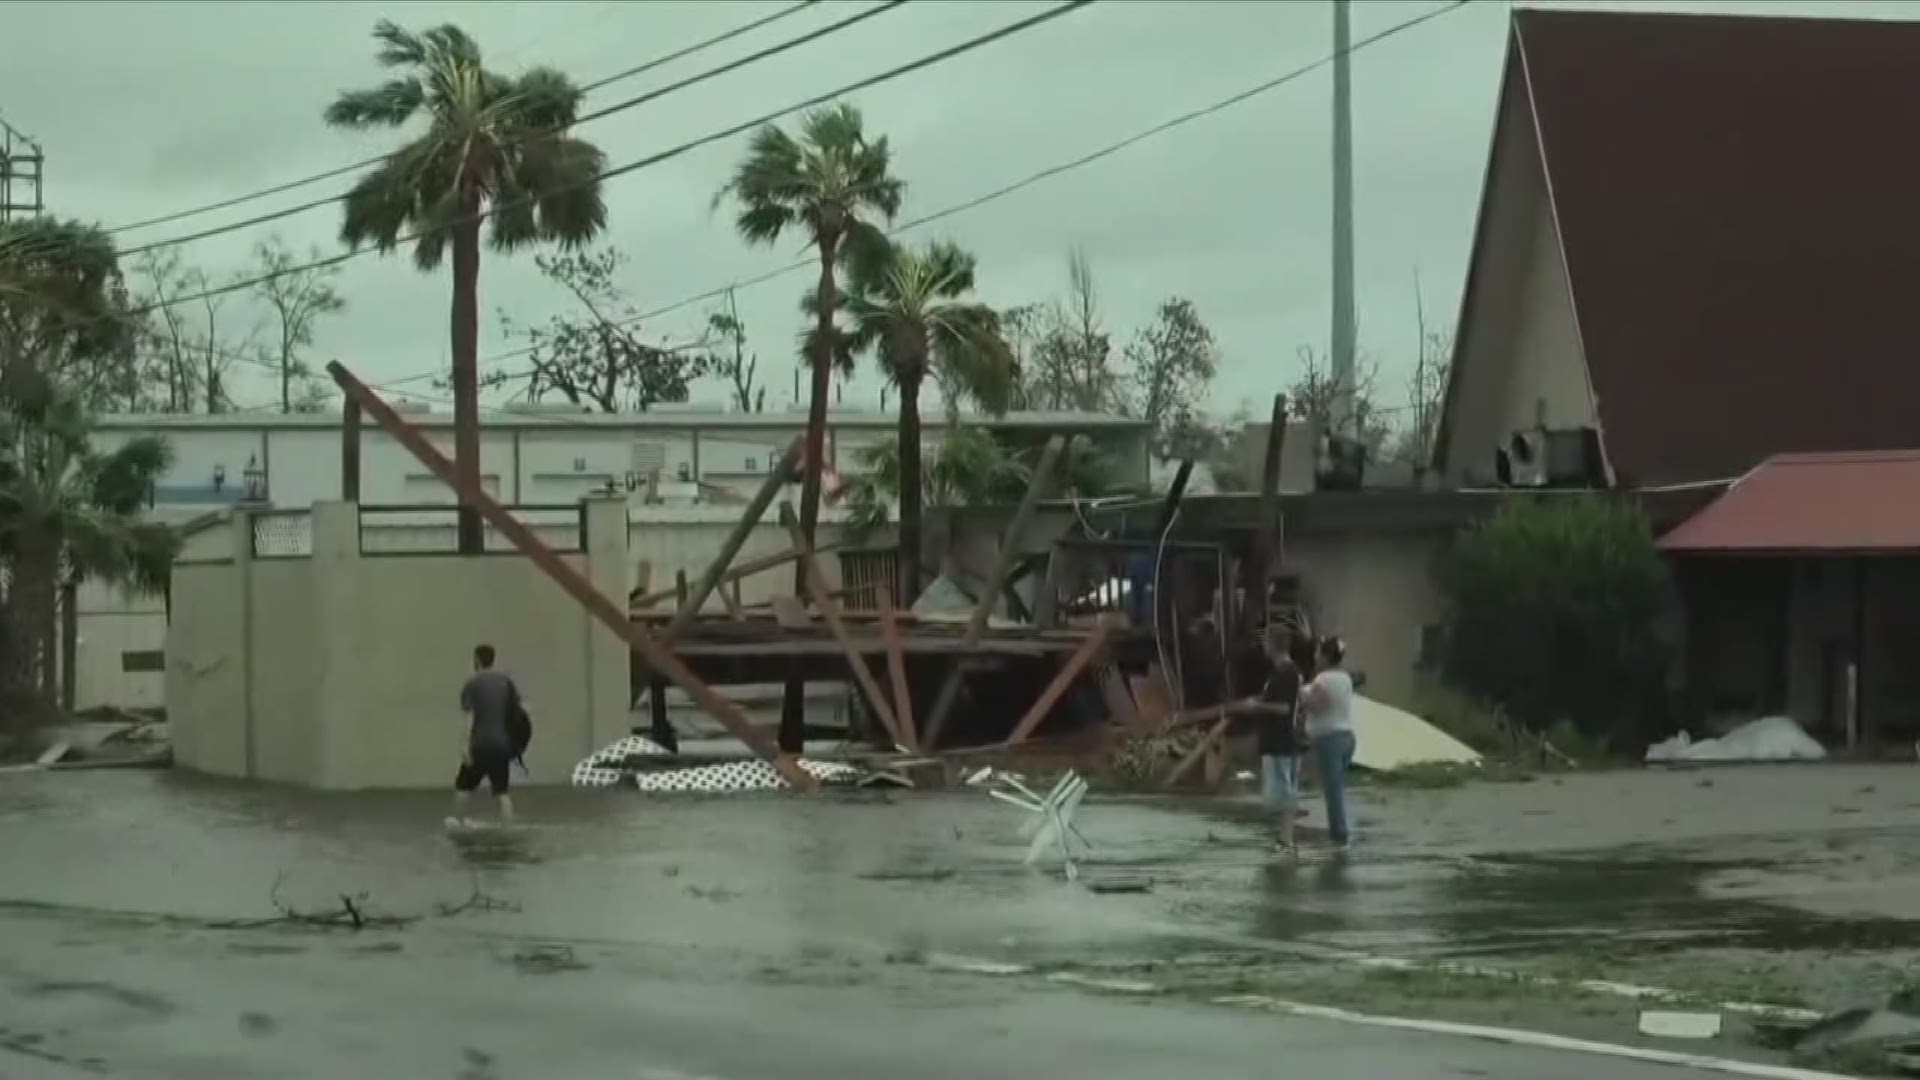 Hurricane Michael made landfall hit the Florida Panhandle as a powerful category 4 storm, causing destruction in parts of Panama City.